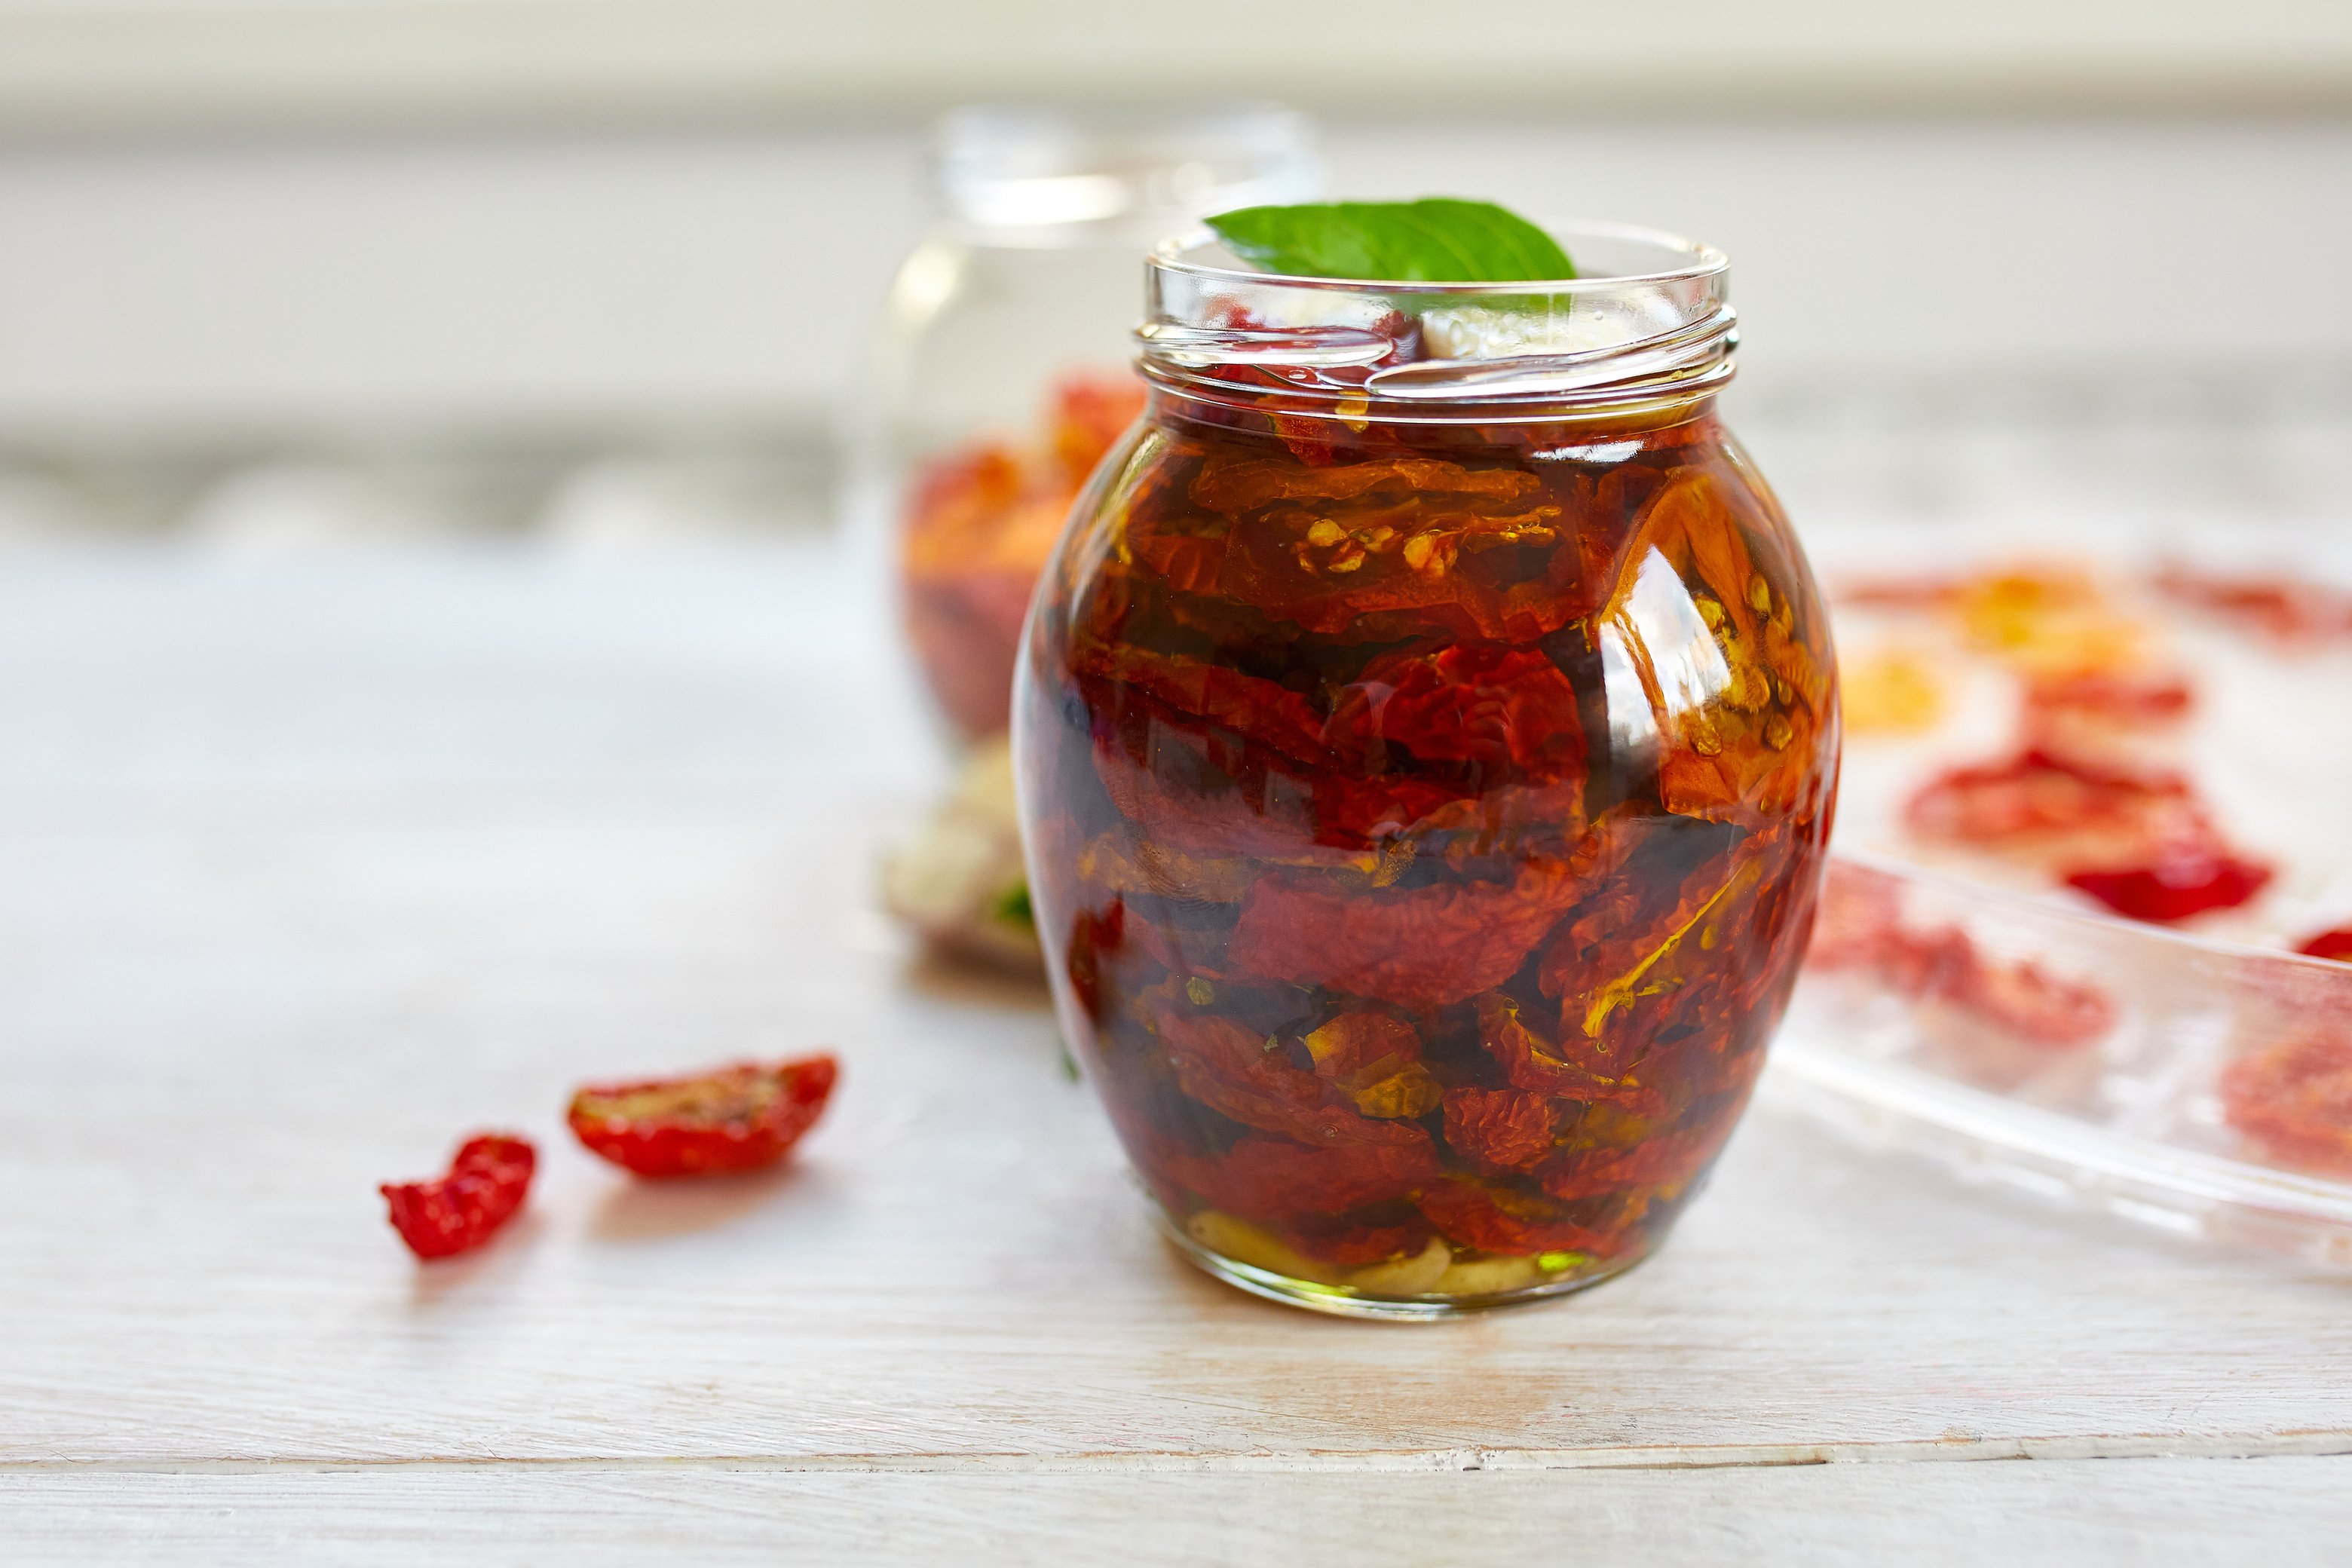 Homemade Sun Dried Tomatoes with Herbs and Garlic in a Jar